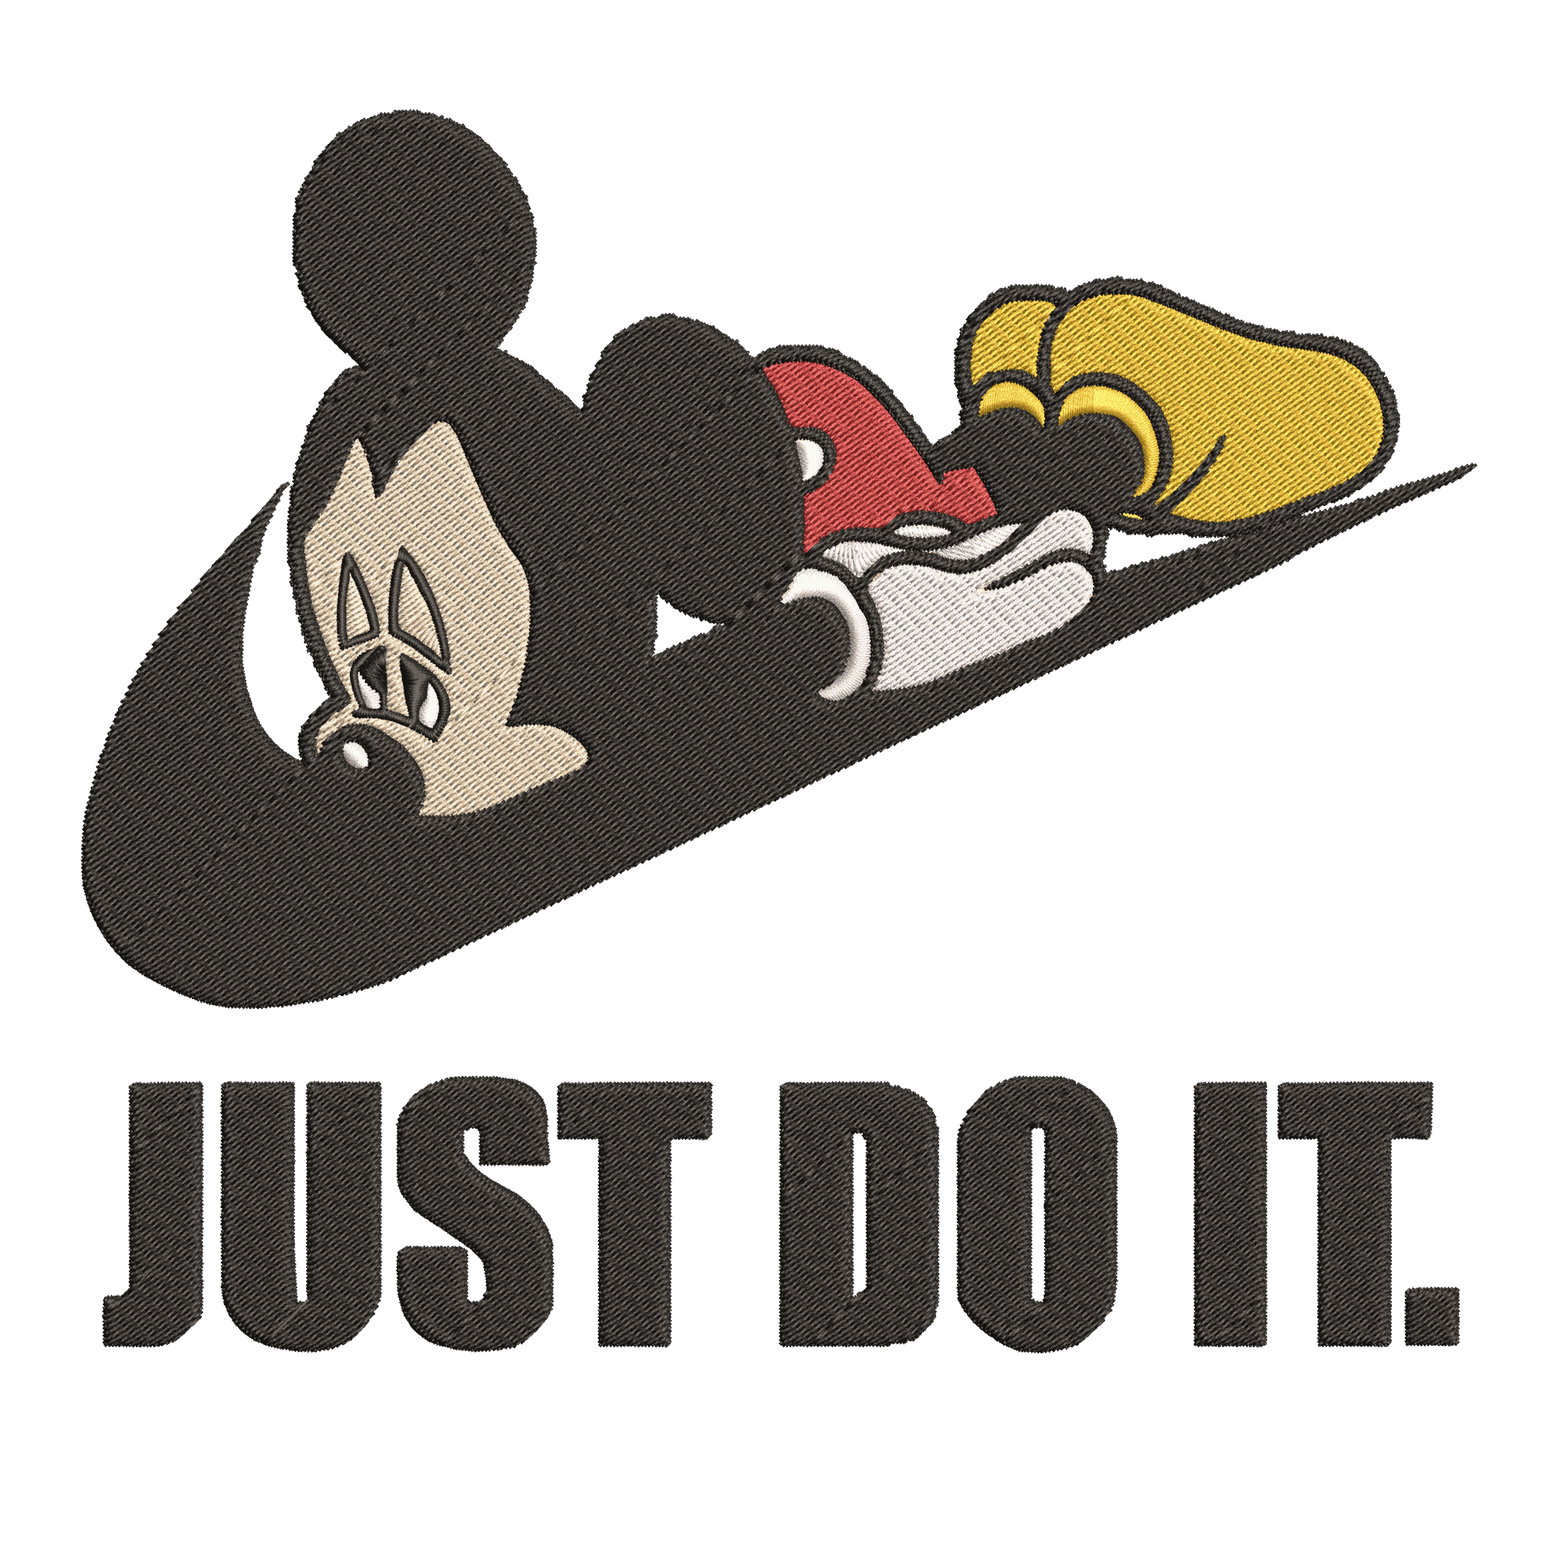 Nike Just Do It - Mickey - Anime - Embroidery Design FineryEmbroidery